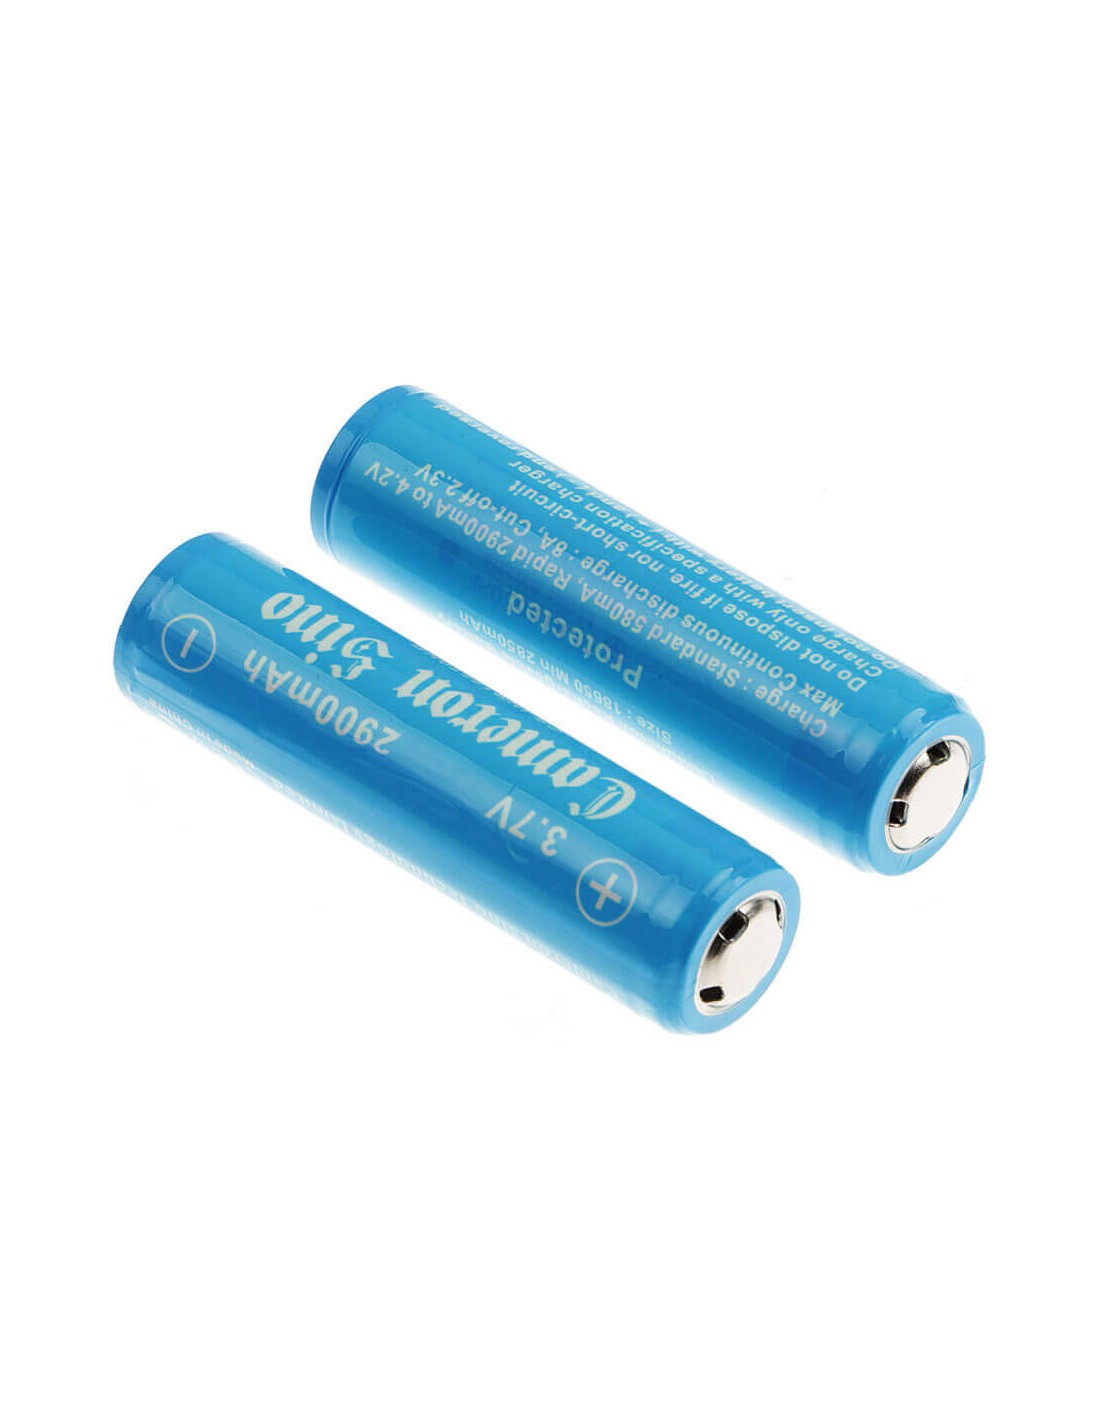 Battery for Lithium Ion, 2pcs 18650 Pack With PCB Protected 3.7V, 2900mAh - 10.73Wh